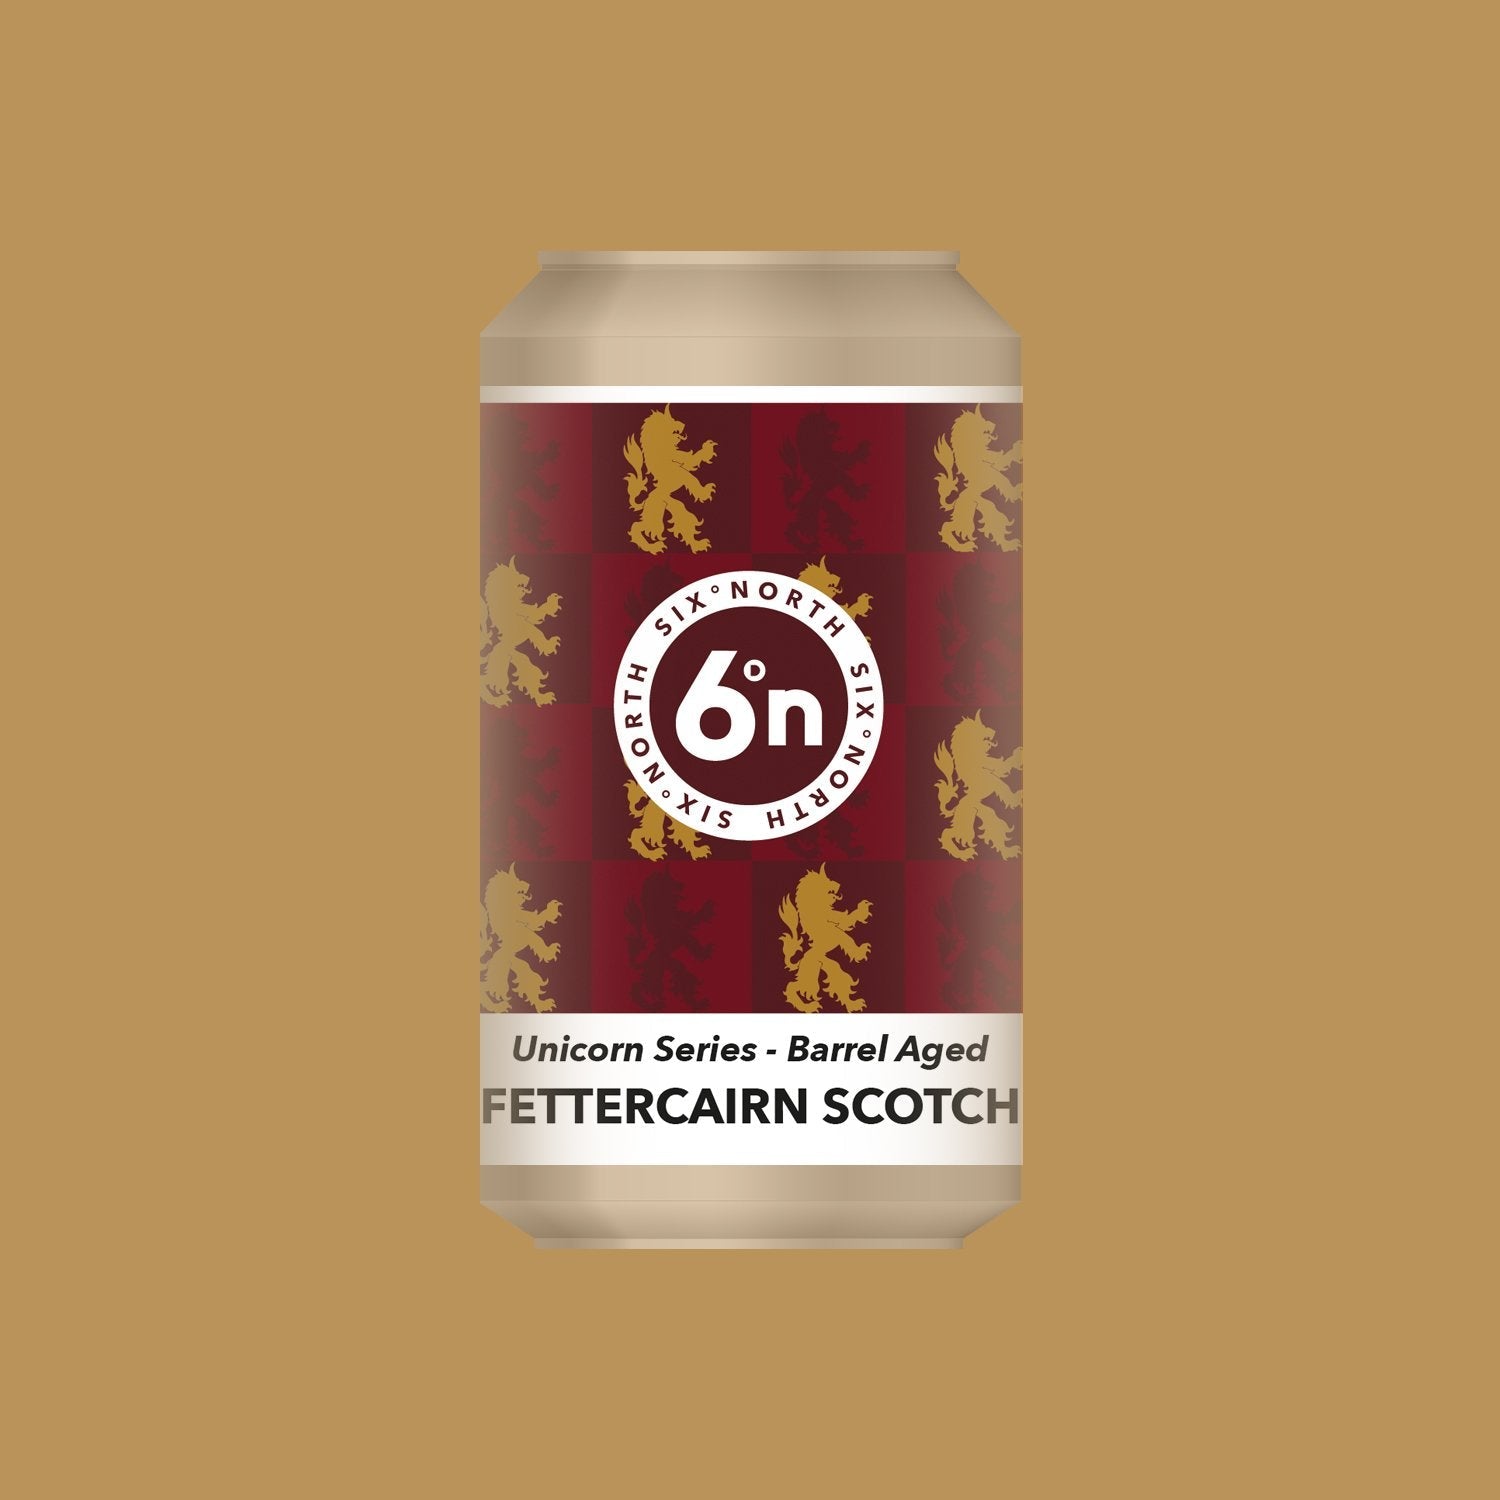 6 Degrees North (6DN) Unicorn Series - Barrel Aged Fettercairn Scotch 330ml Can-Scottish Beers-Fountainhall Wines